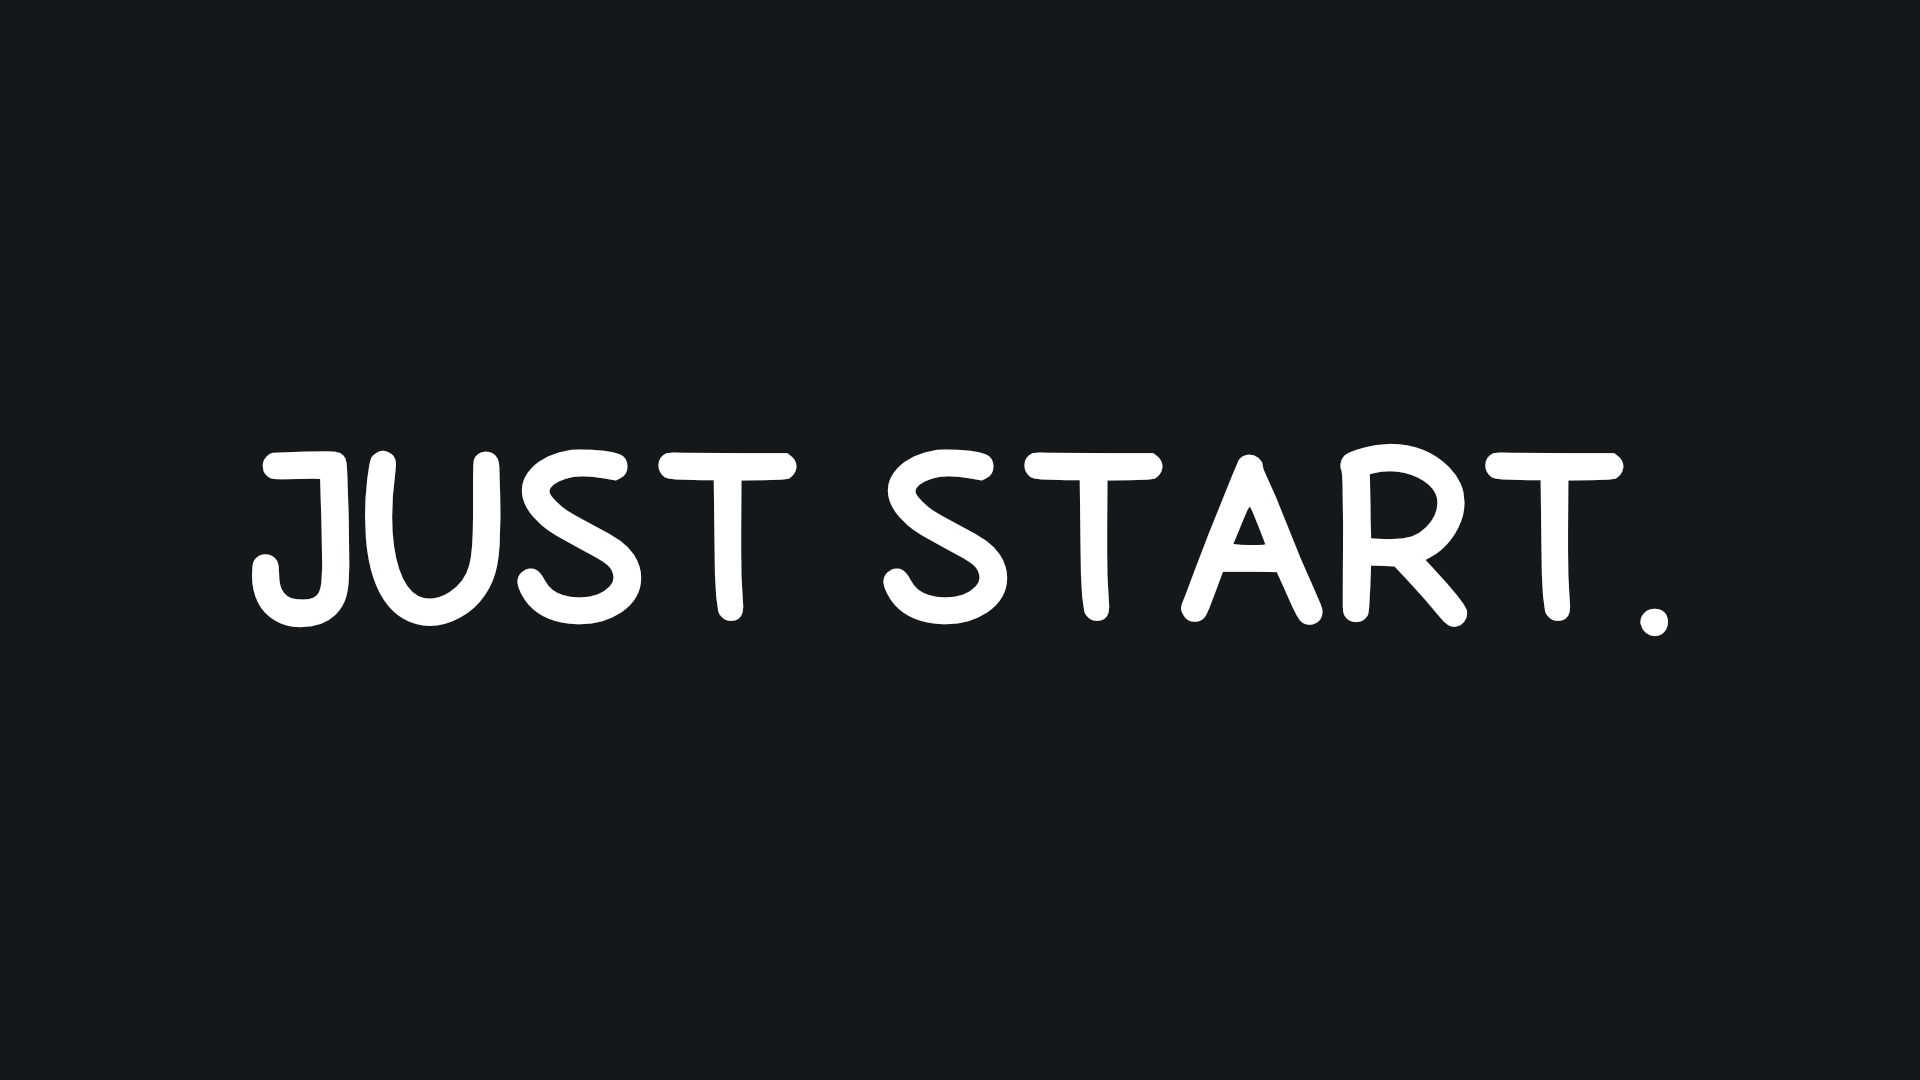 White "Just start." capitalized at the center in a black background.